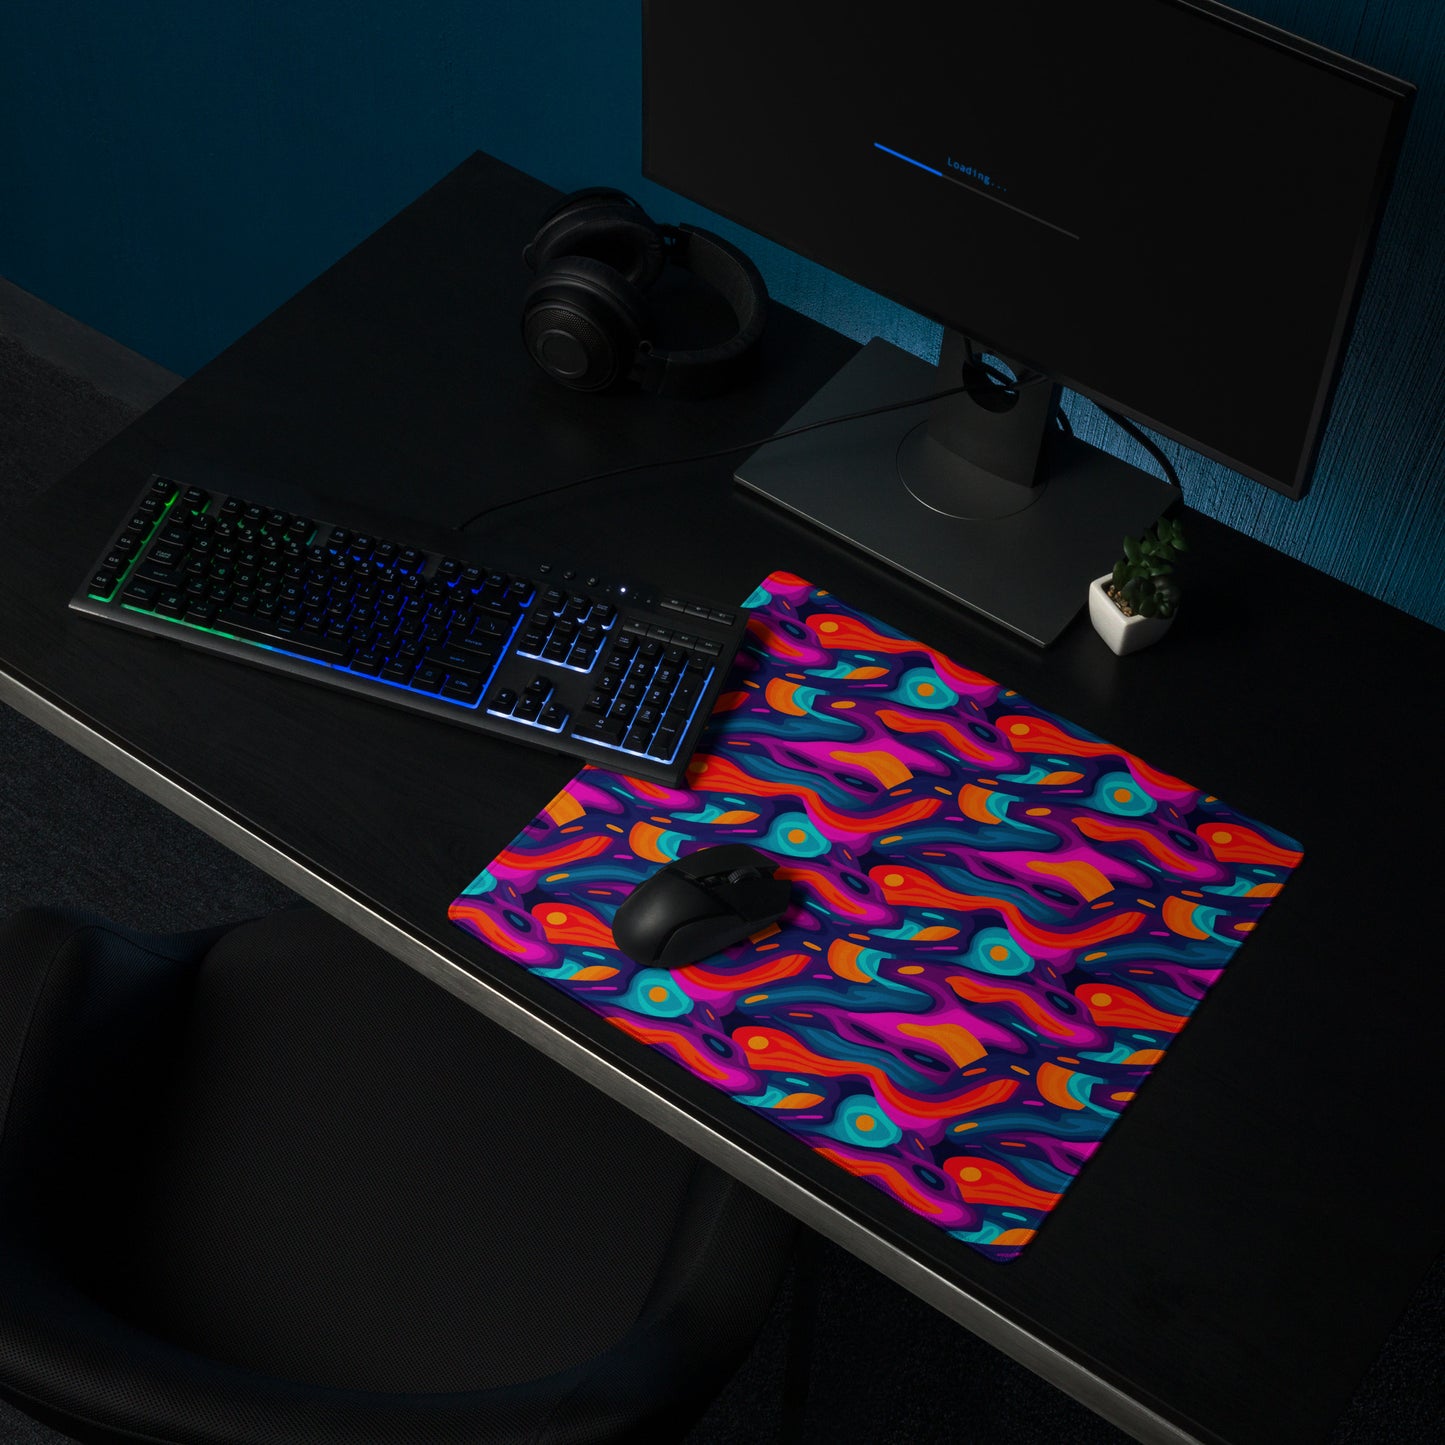 A 18" x 16" desk pad with a wavy abstract pattern on it shown on a desk setup. Blue, Purple and Red in color.